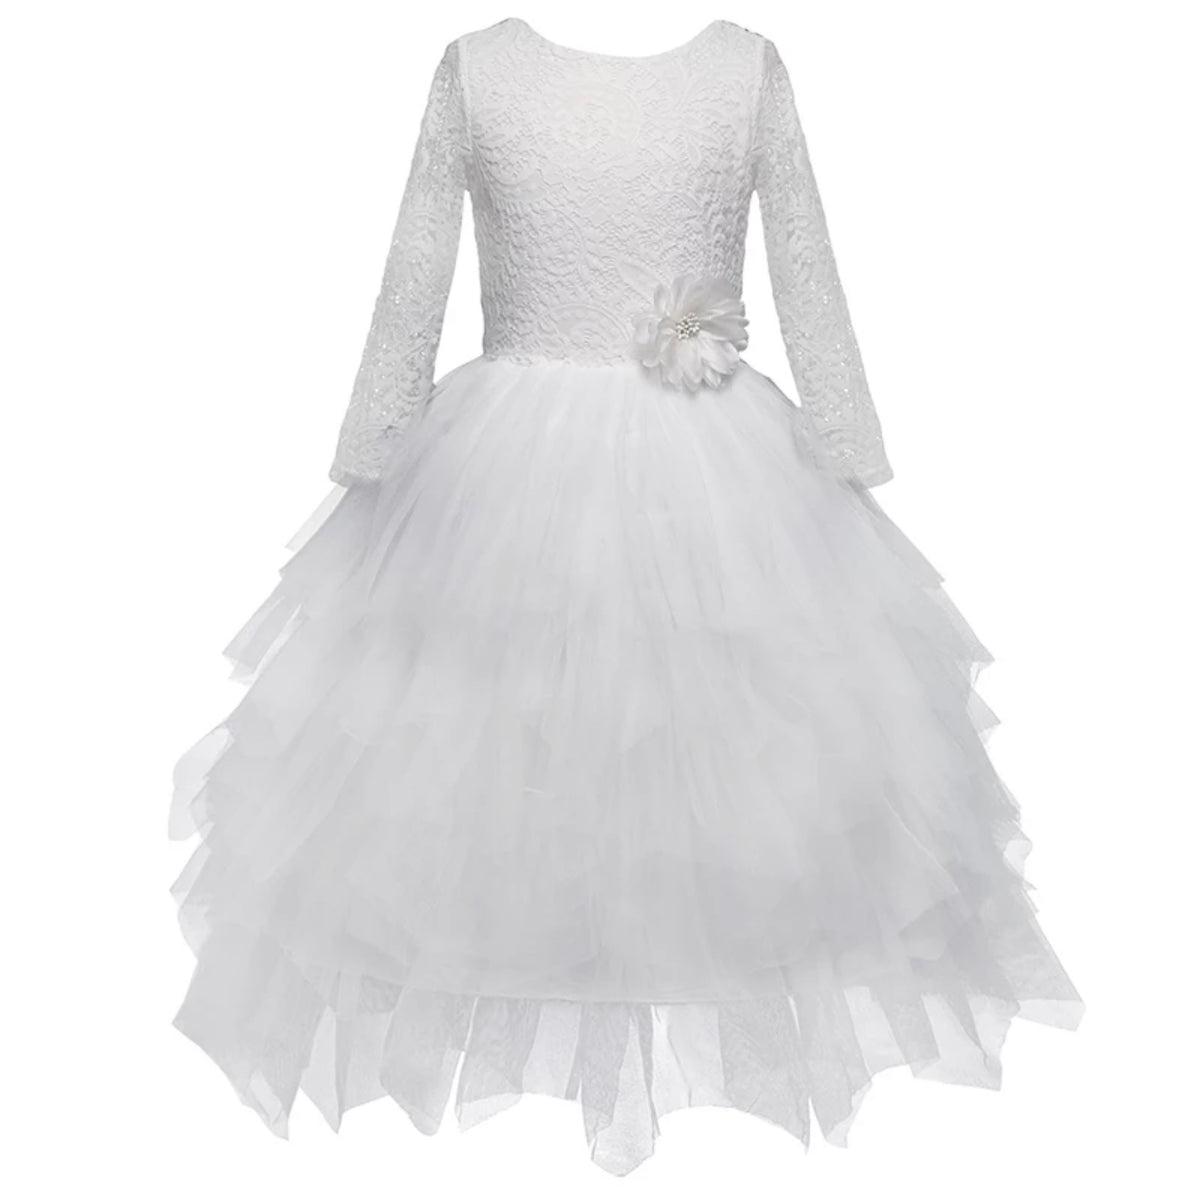 White Long Sleeved Lacey Tulle Dress